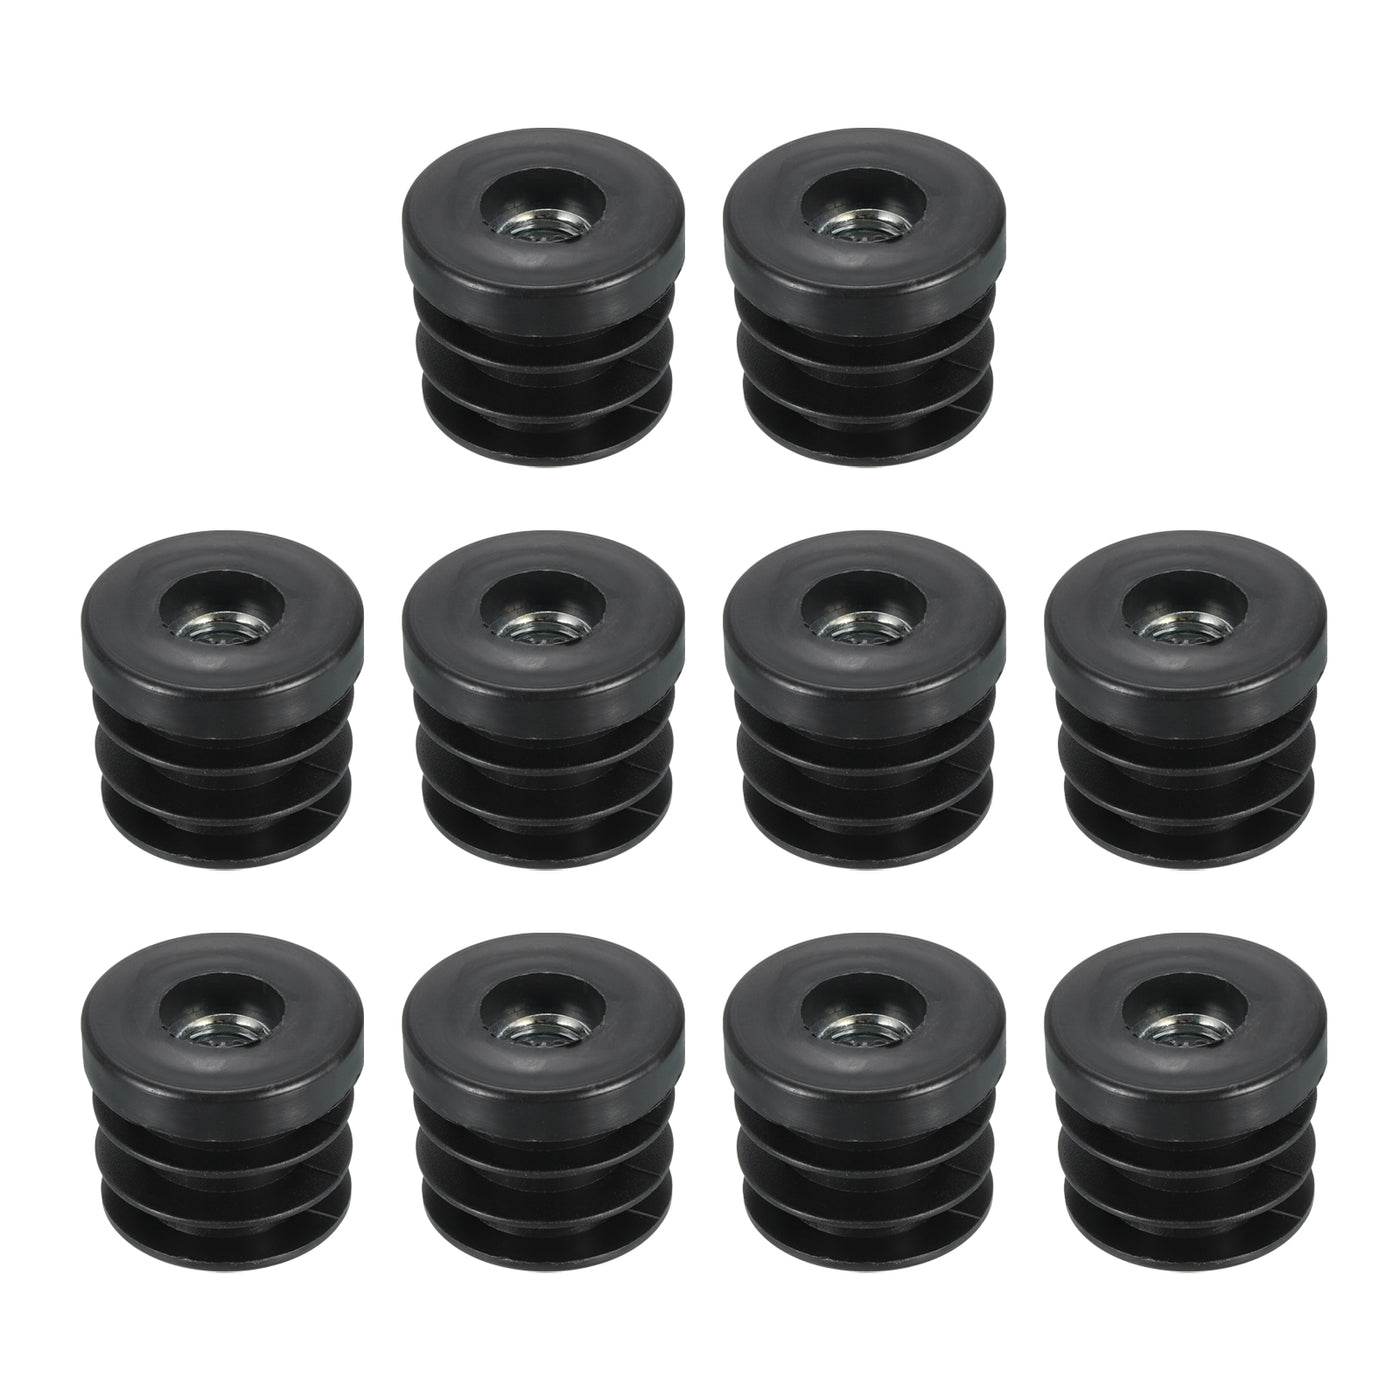 uxcell Uxcell 10Pcs Caster Insert with Thread, 30mm/1.18" M10 Thread for Furniture